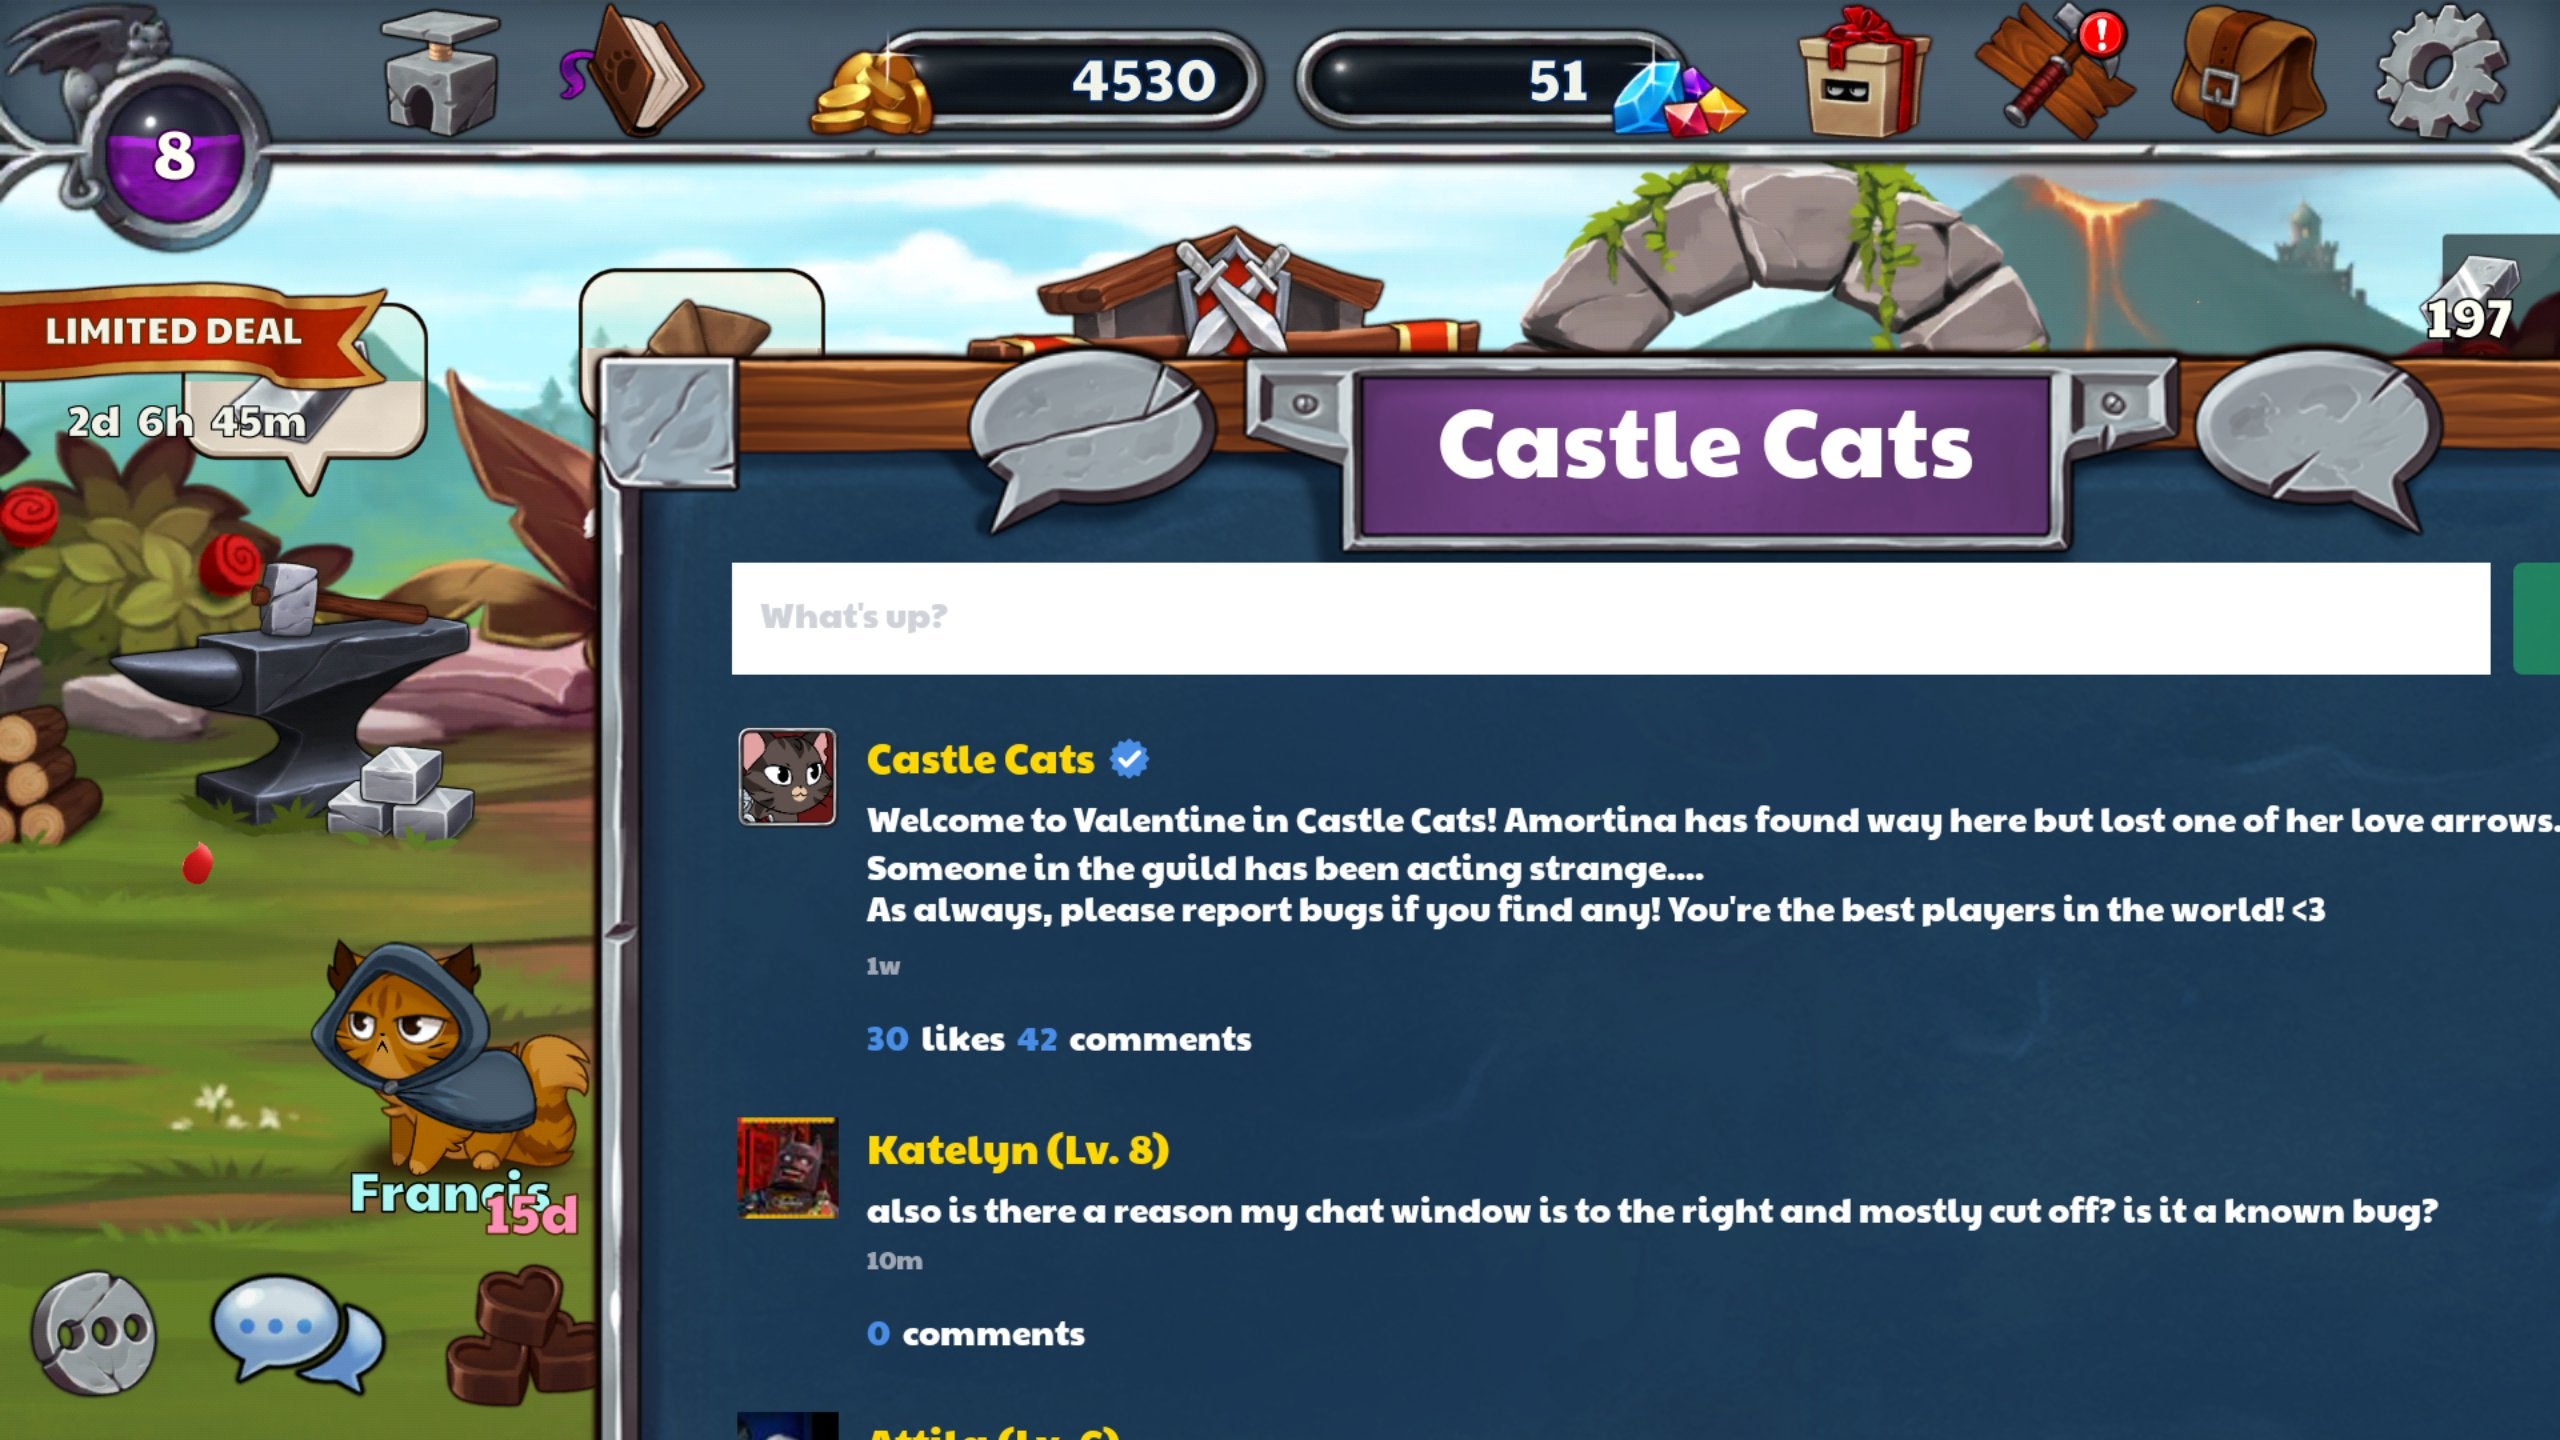 Retention rates for PocApps’s mobile game Castle Cats